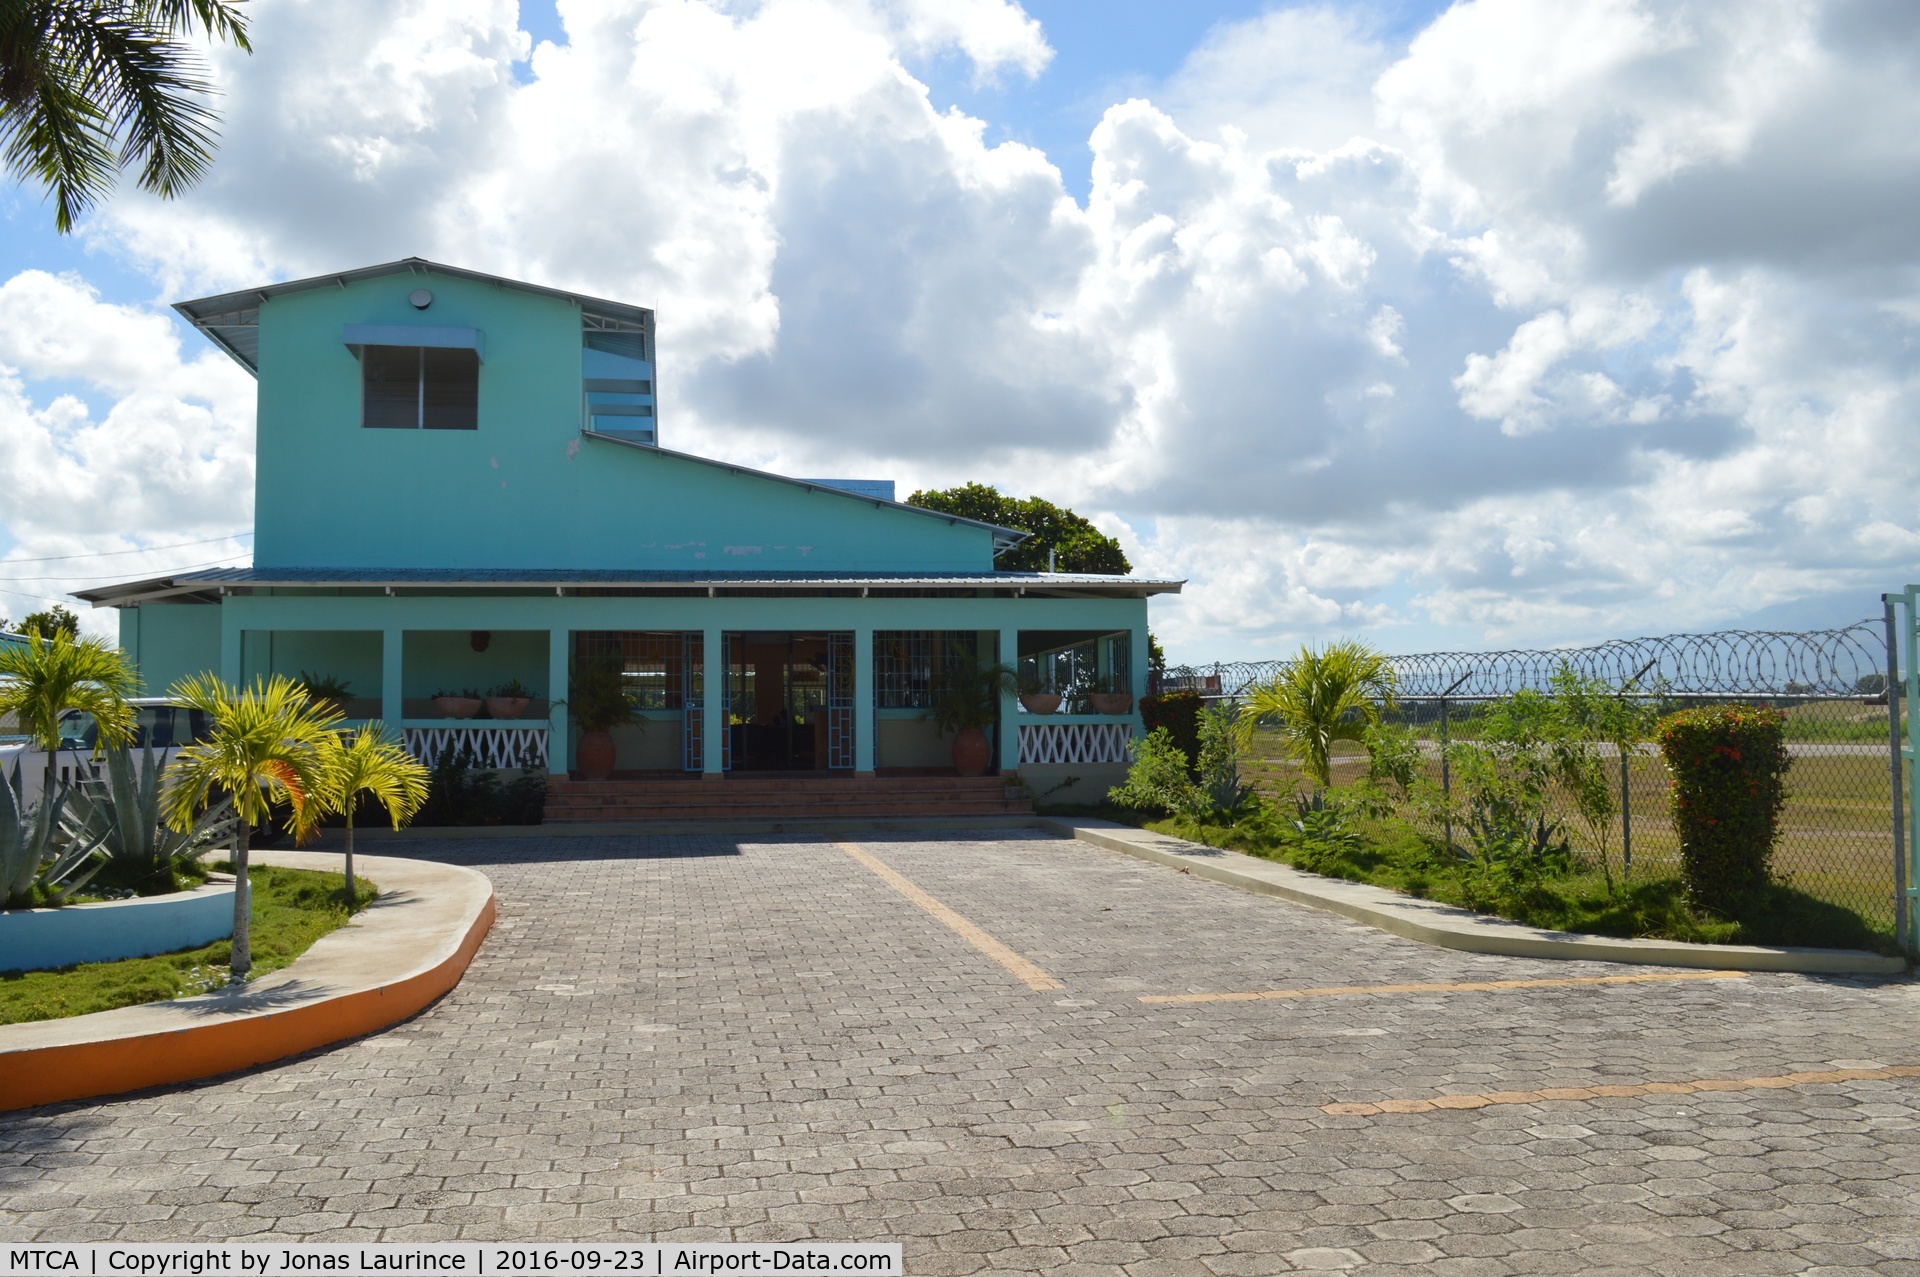 Les Cayes Airport, Les Cayes Haiti (MTCA) - The main building of the Airport of Les Cayes